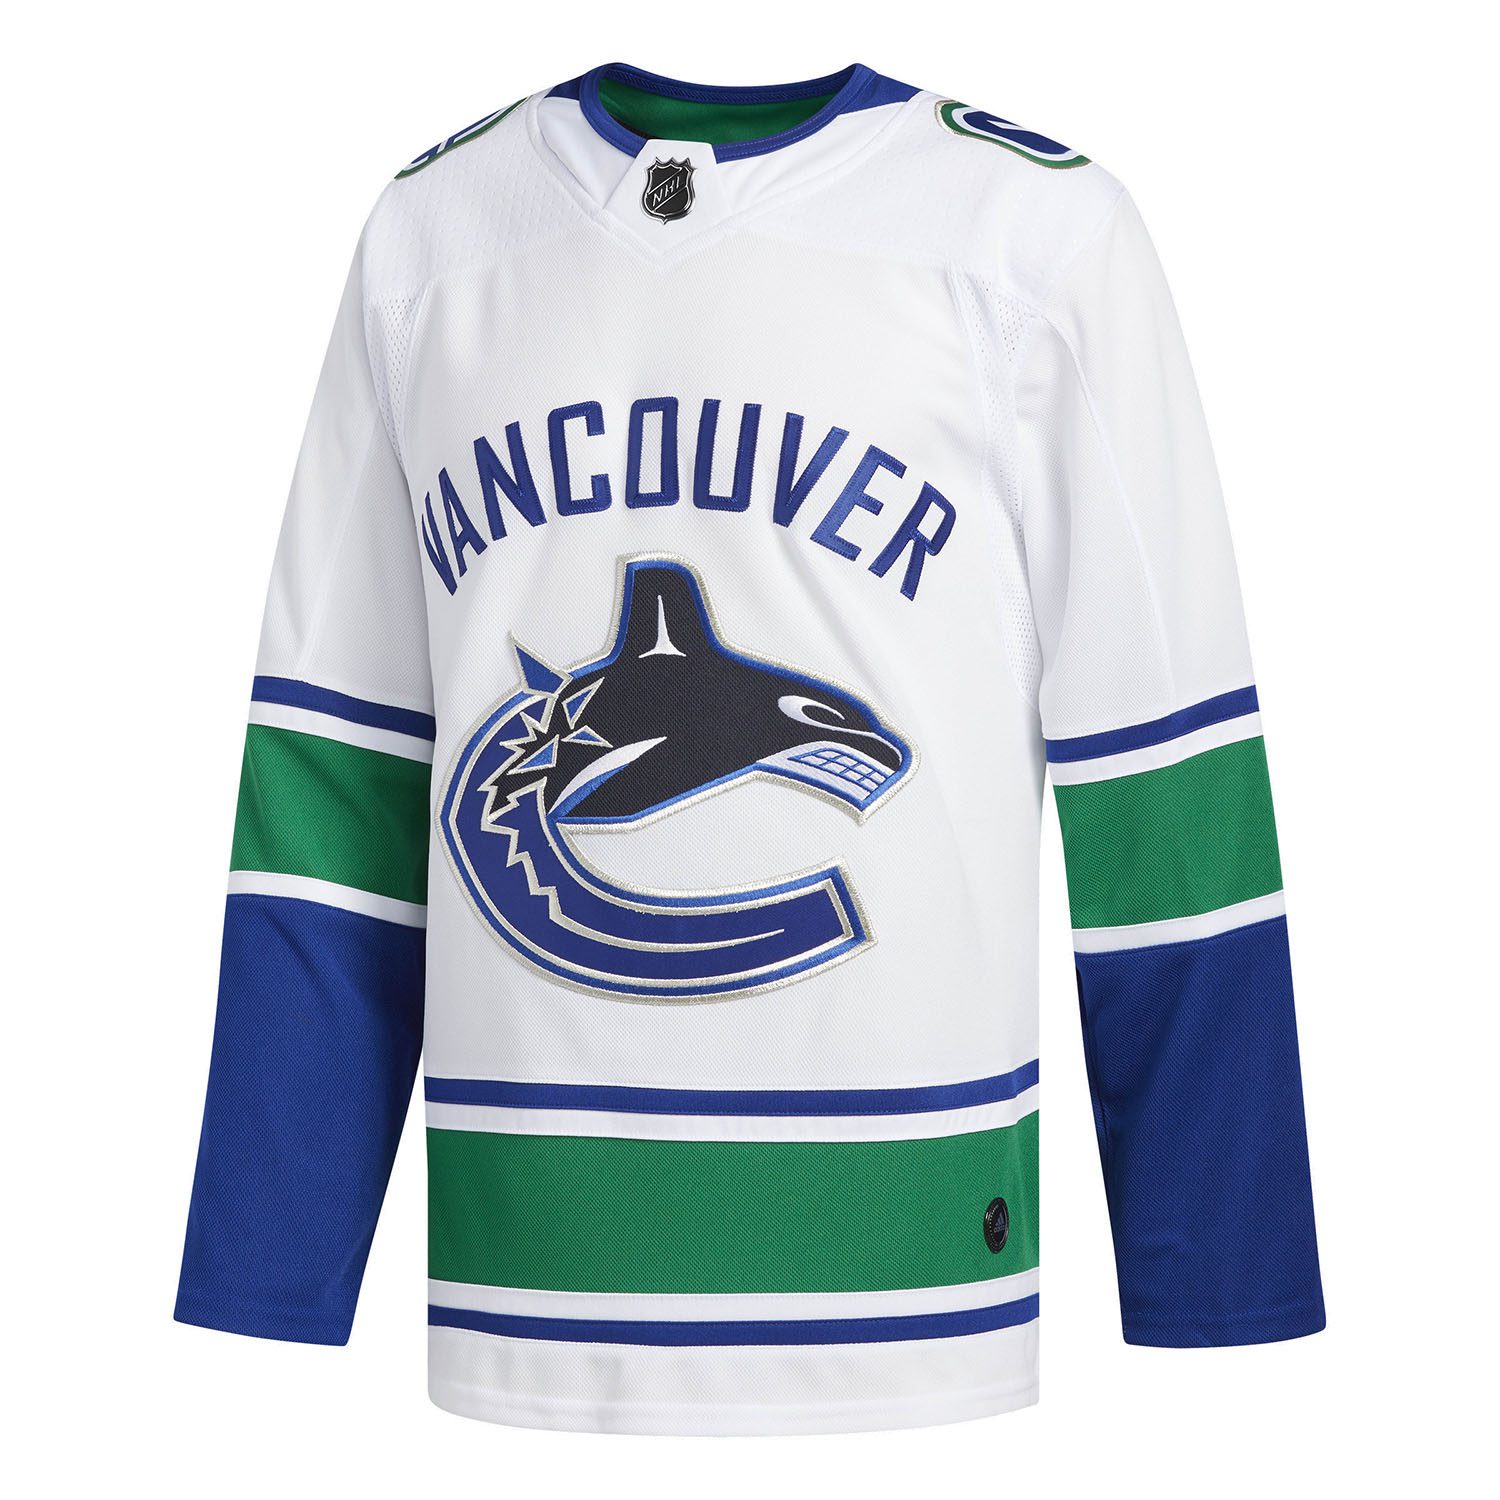 Adidas Men's Vancouver Canucks Away Authentic Pro White Hockey Jersey